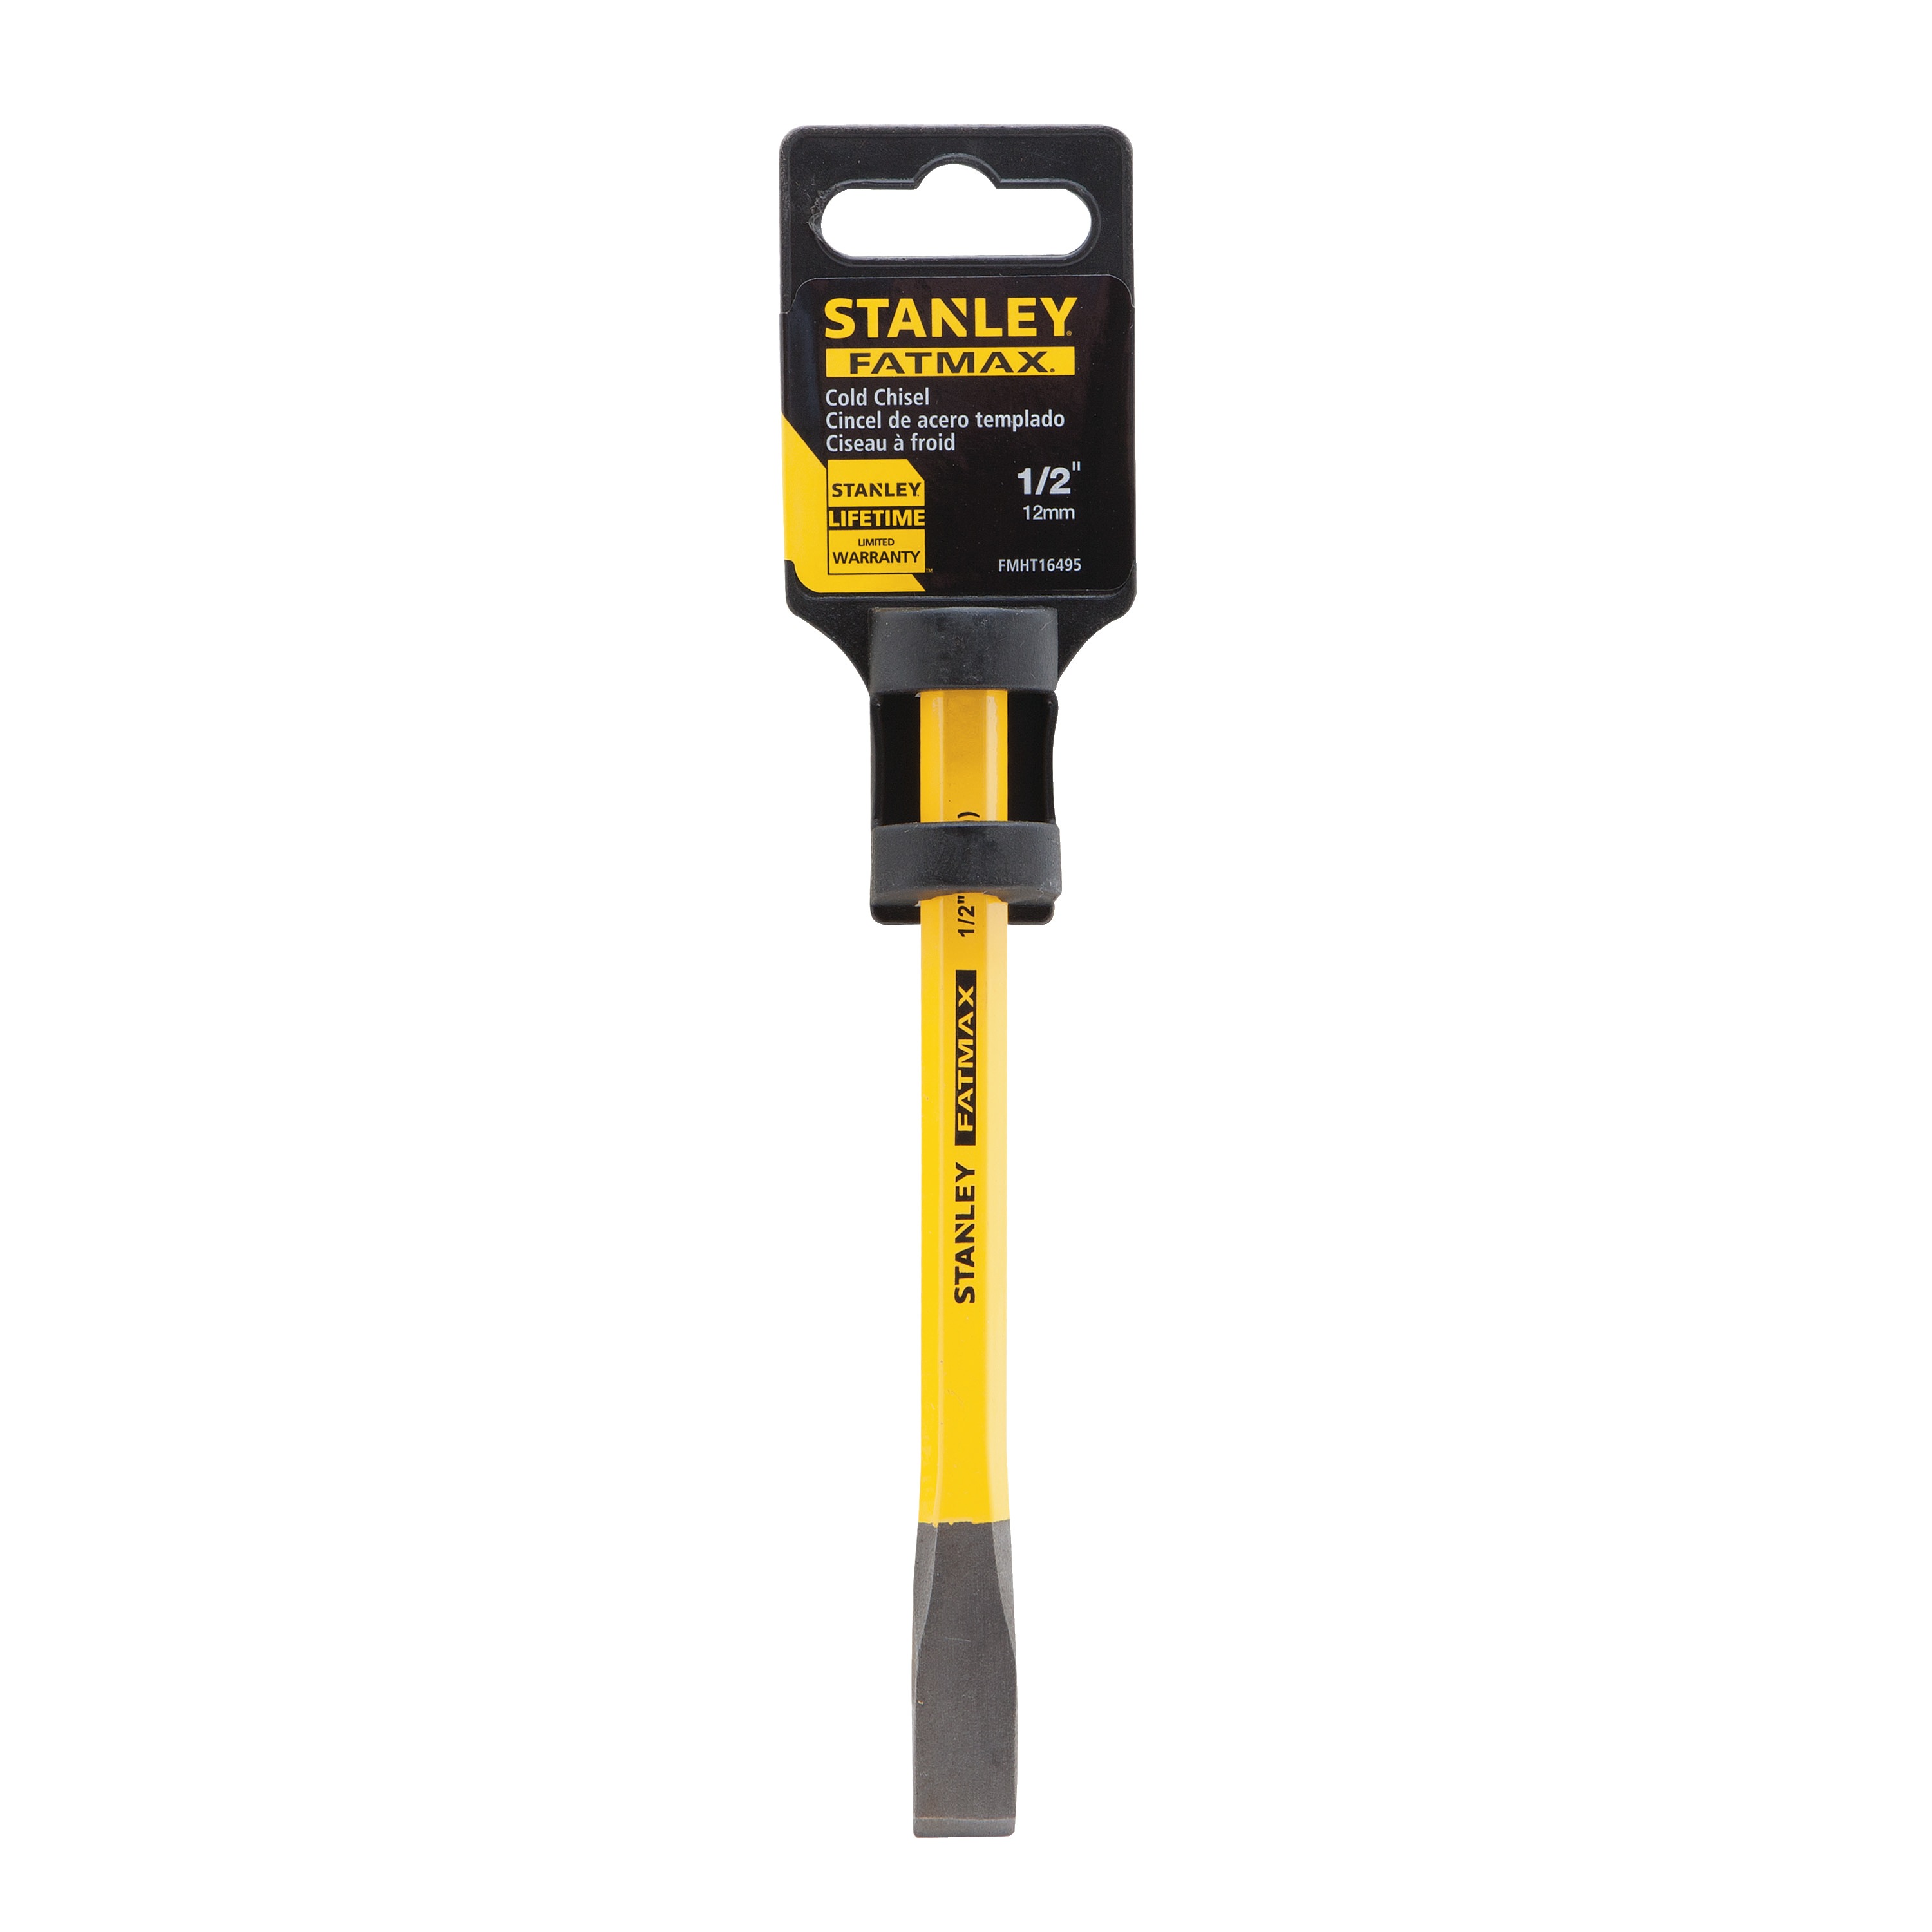 Stanley Tools - 12 in FATMAX Cold Chisel - FMHT16495